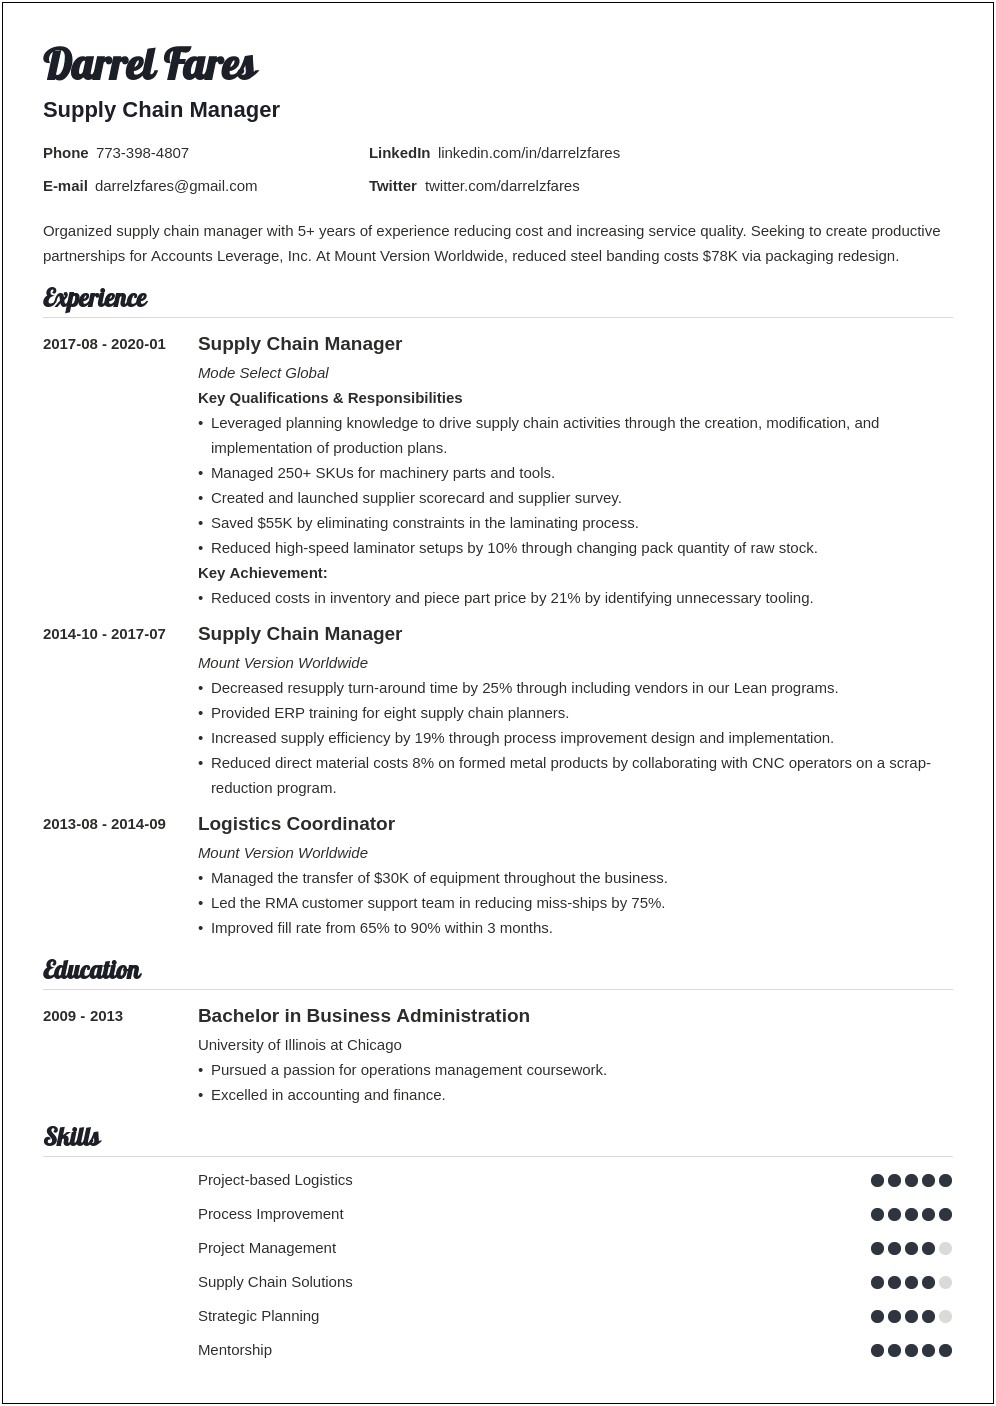 Supply Chain Management Class Resume